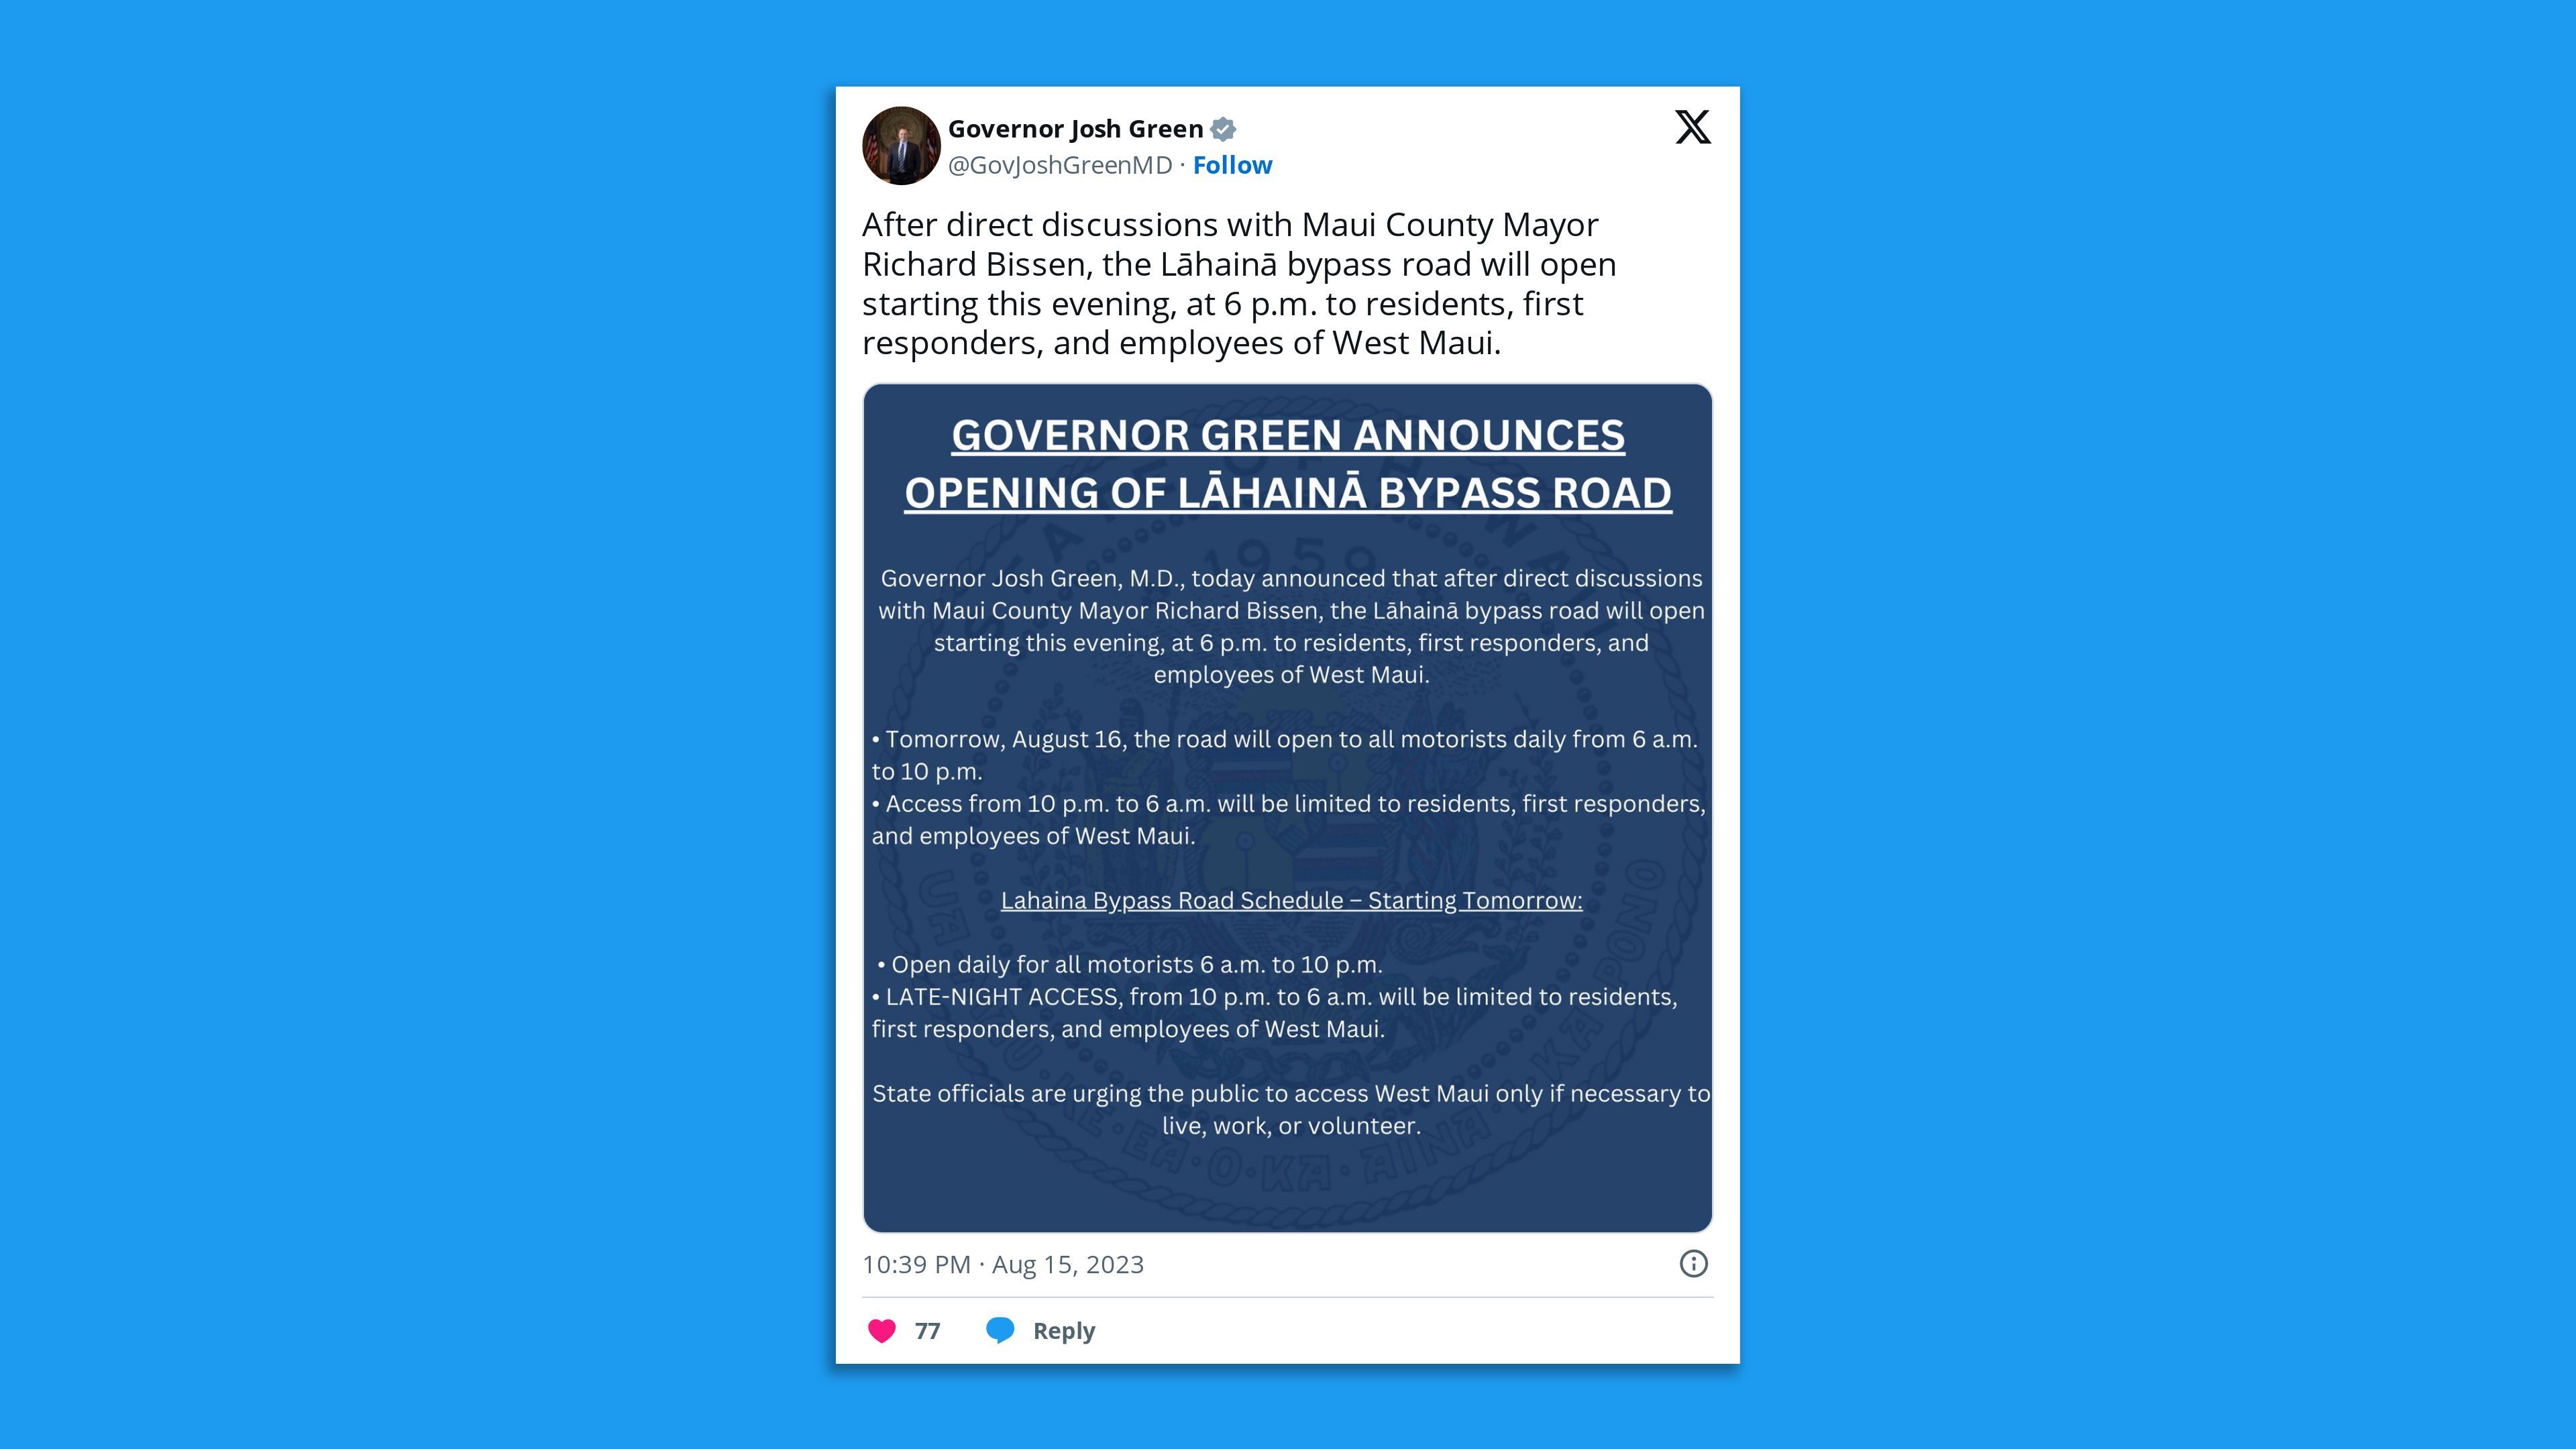 A screenshot of a tweet by Hawaii Gov. Josh Green, saying: "After direct discussions with Maui County Mayor Richard Bissen, the Lāhainā bypass road will open starting this evening, at 6 p.m. to residents, first responders, and employees of West Maui."